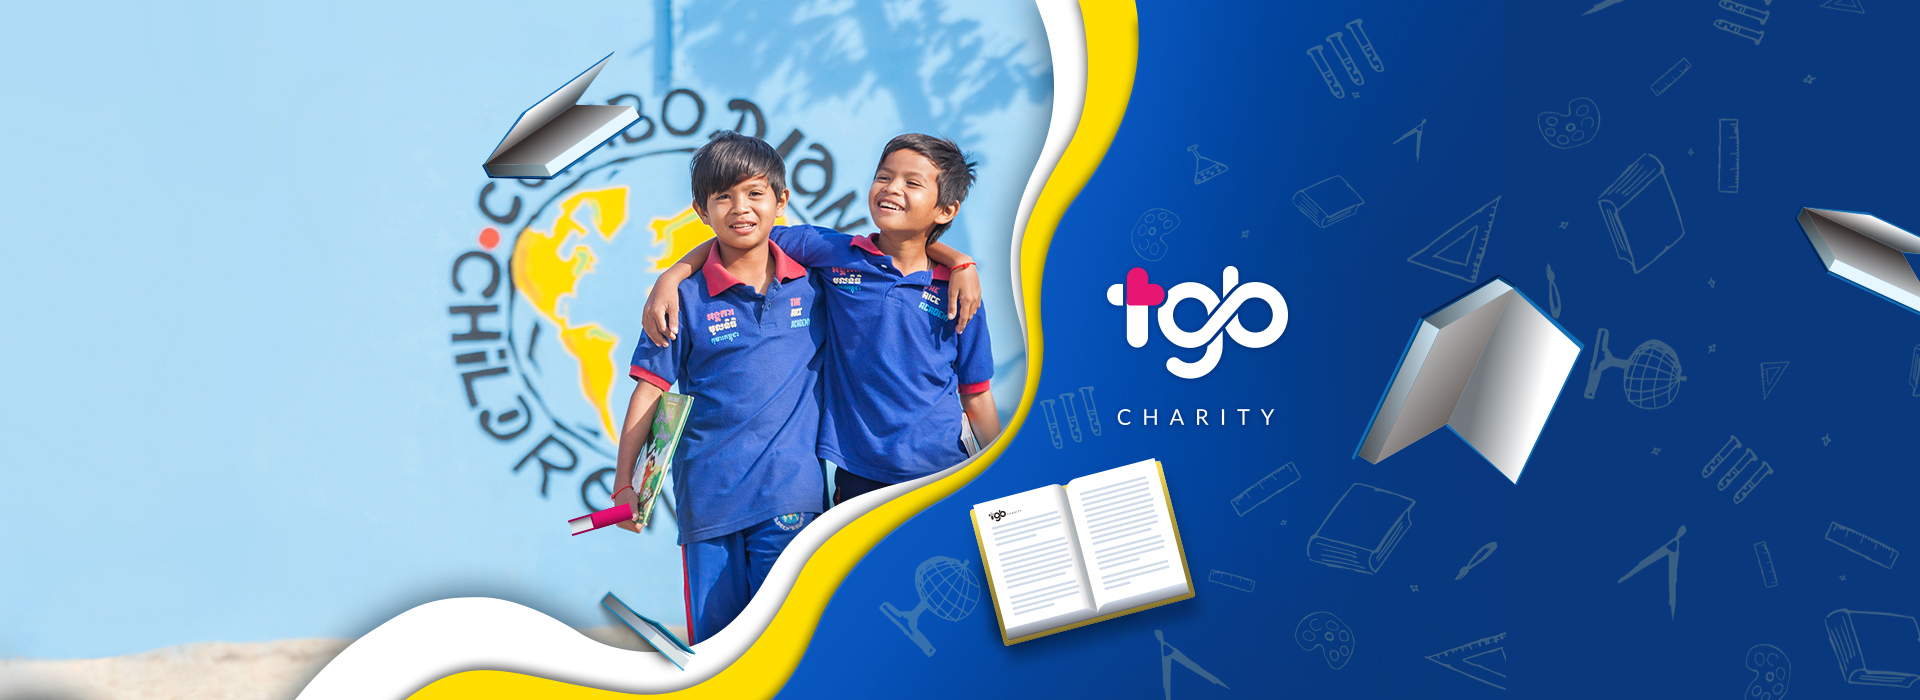 TGB Charity and Cambodian Children’s Fund Support Children’s Development and Education